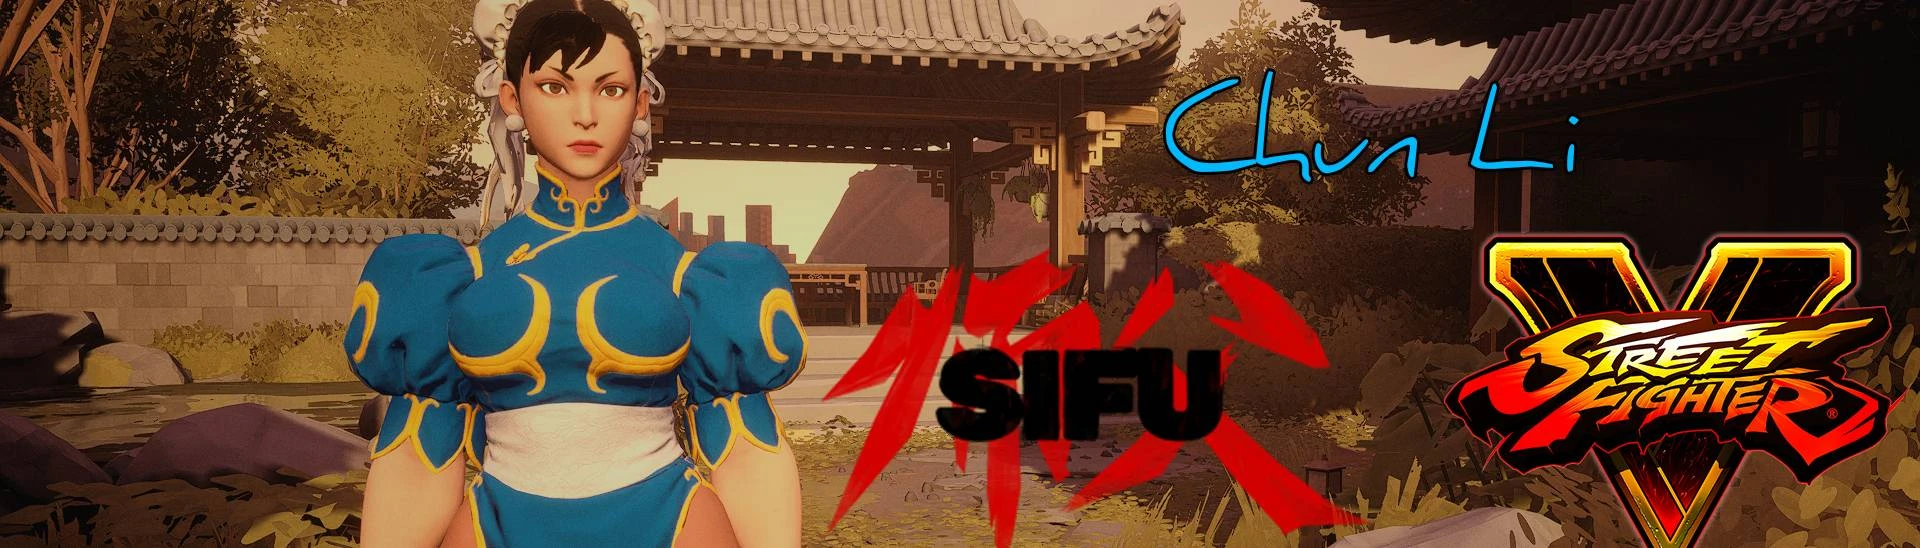 Street Fighter V - Cammy (Default Outfit) at Sifu Nexus - Mods and community